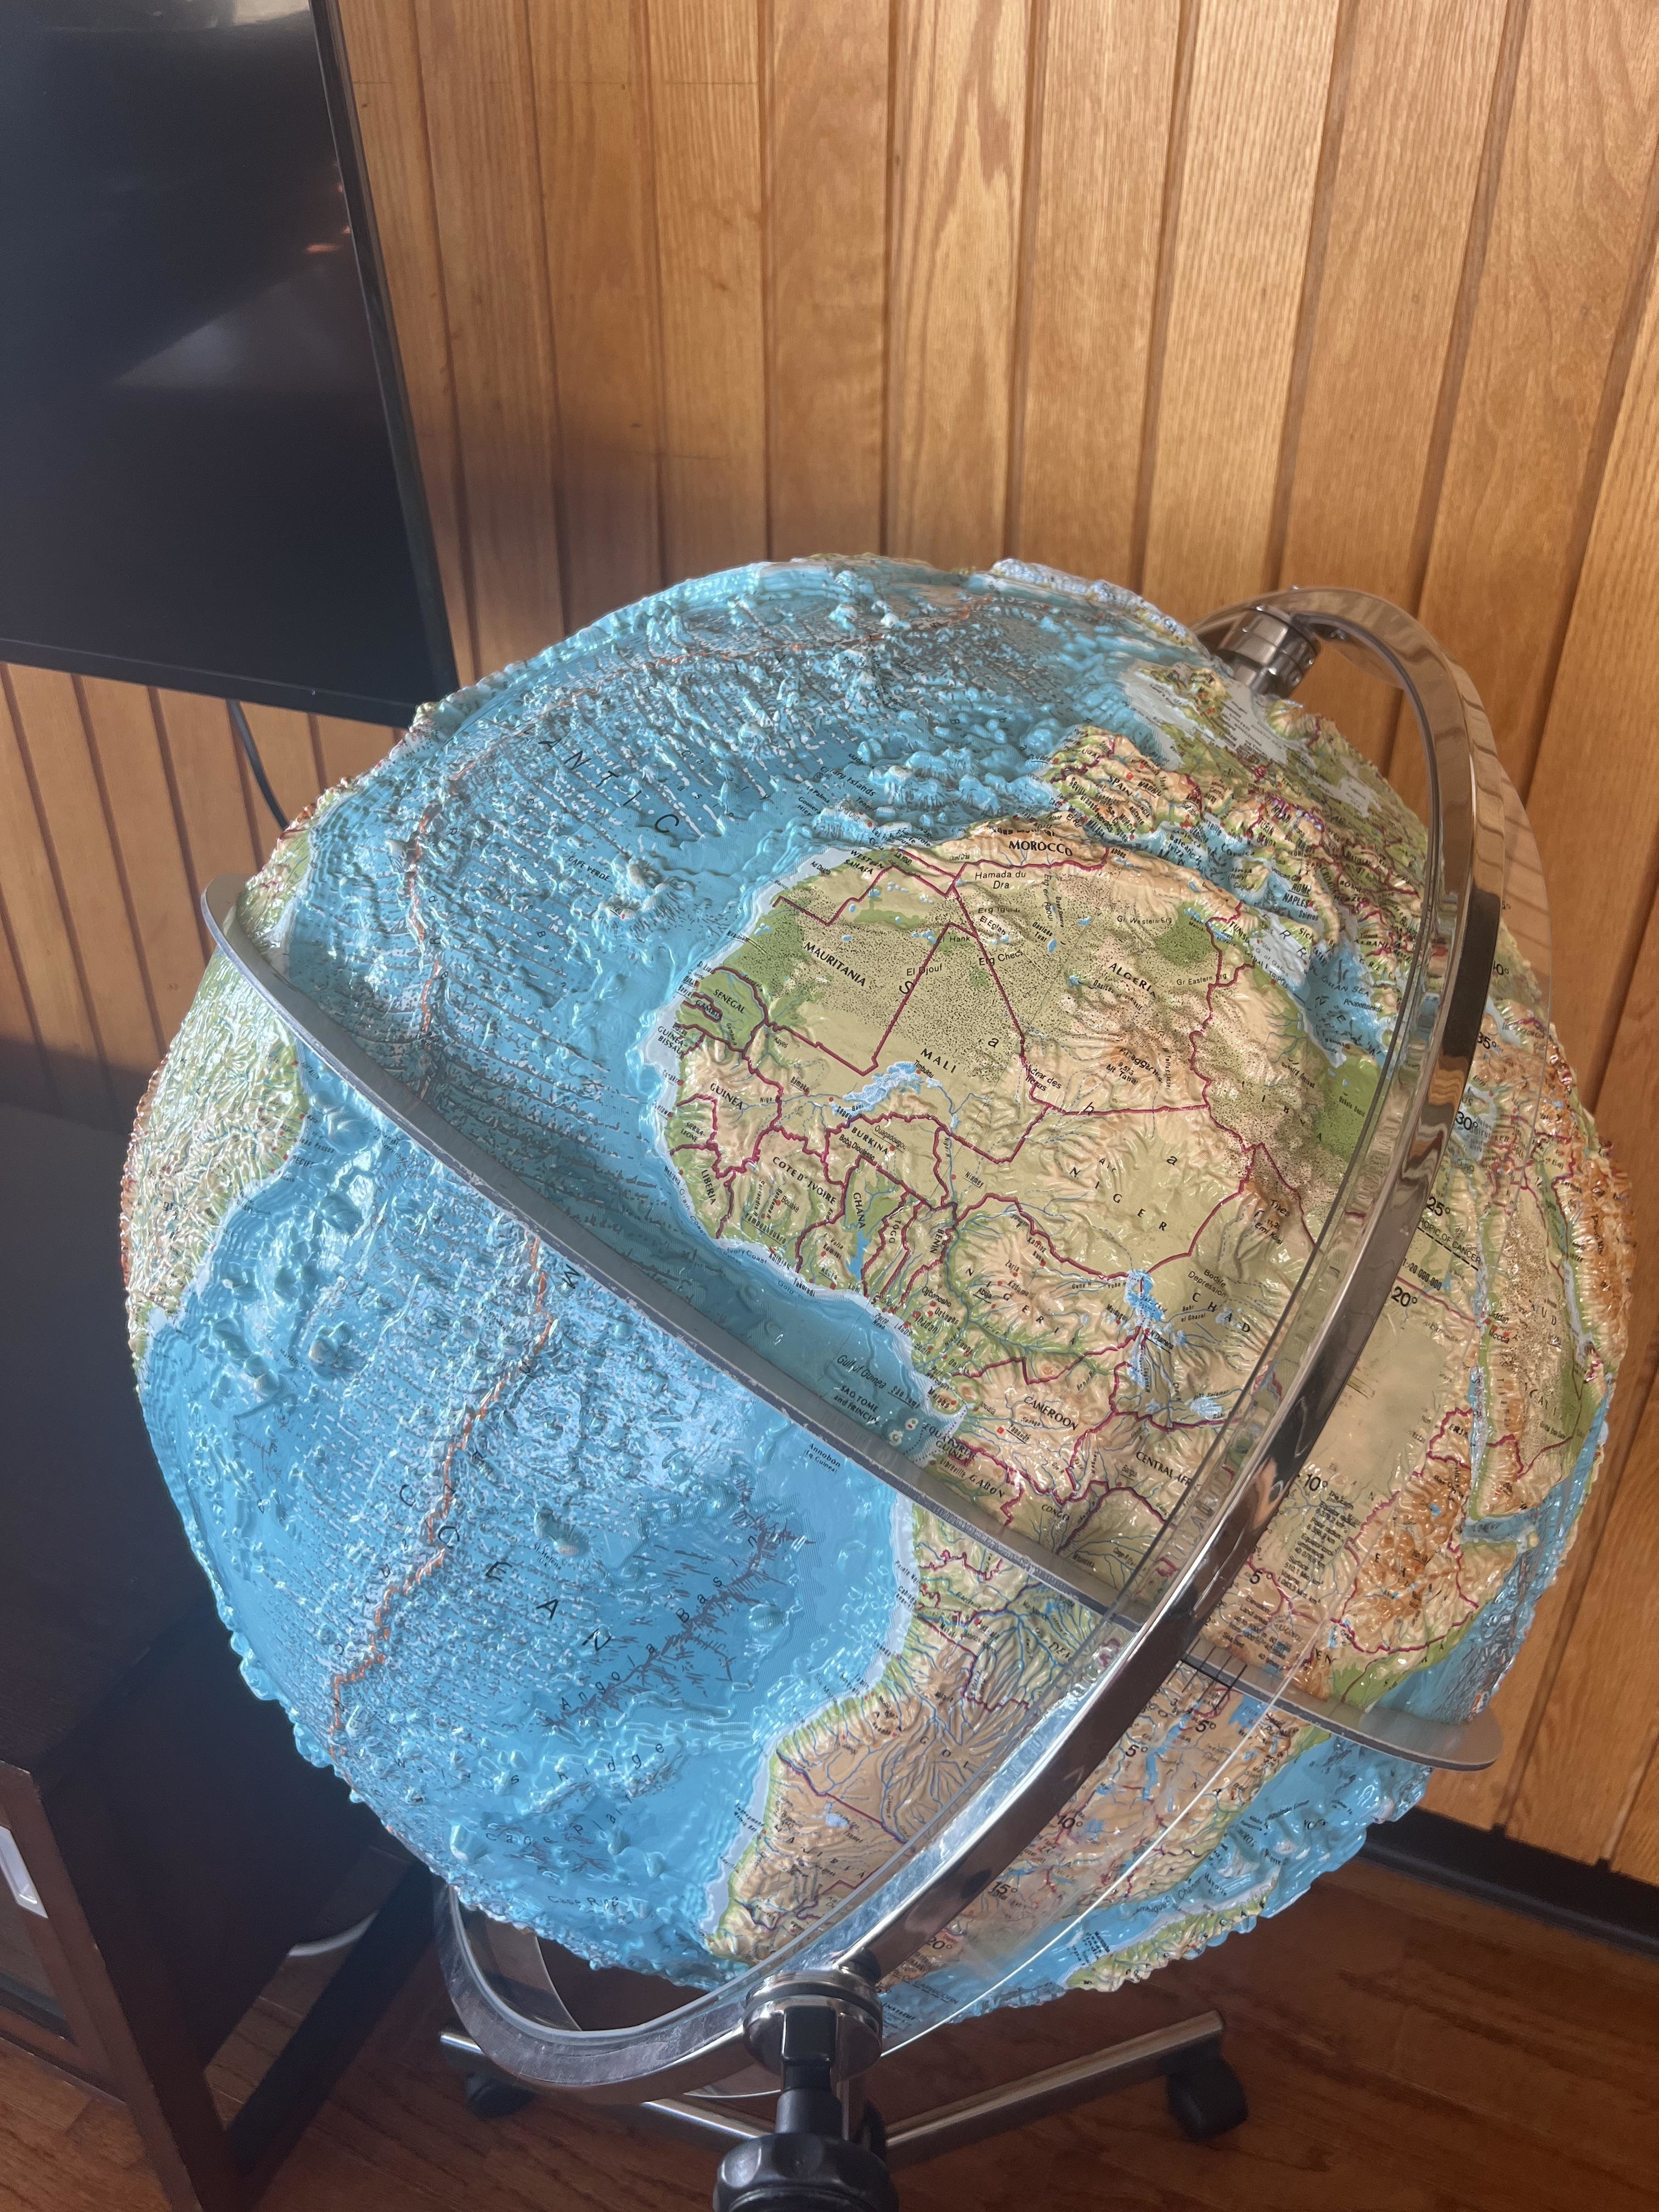 A globe that shows elevation